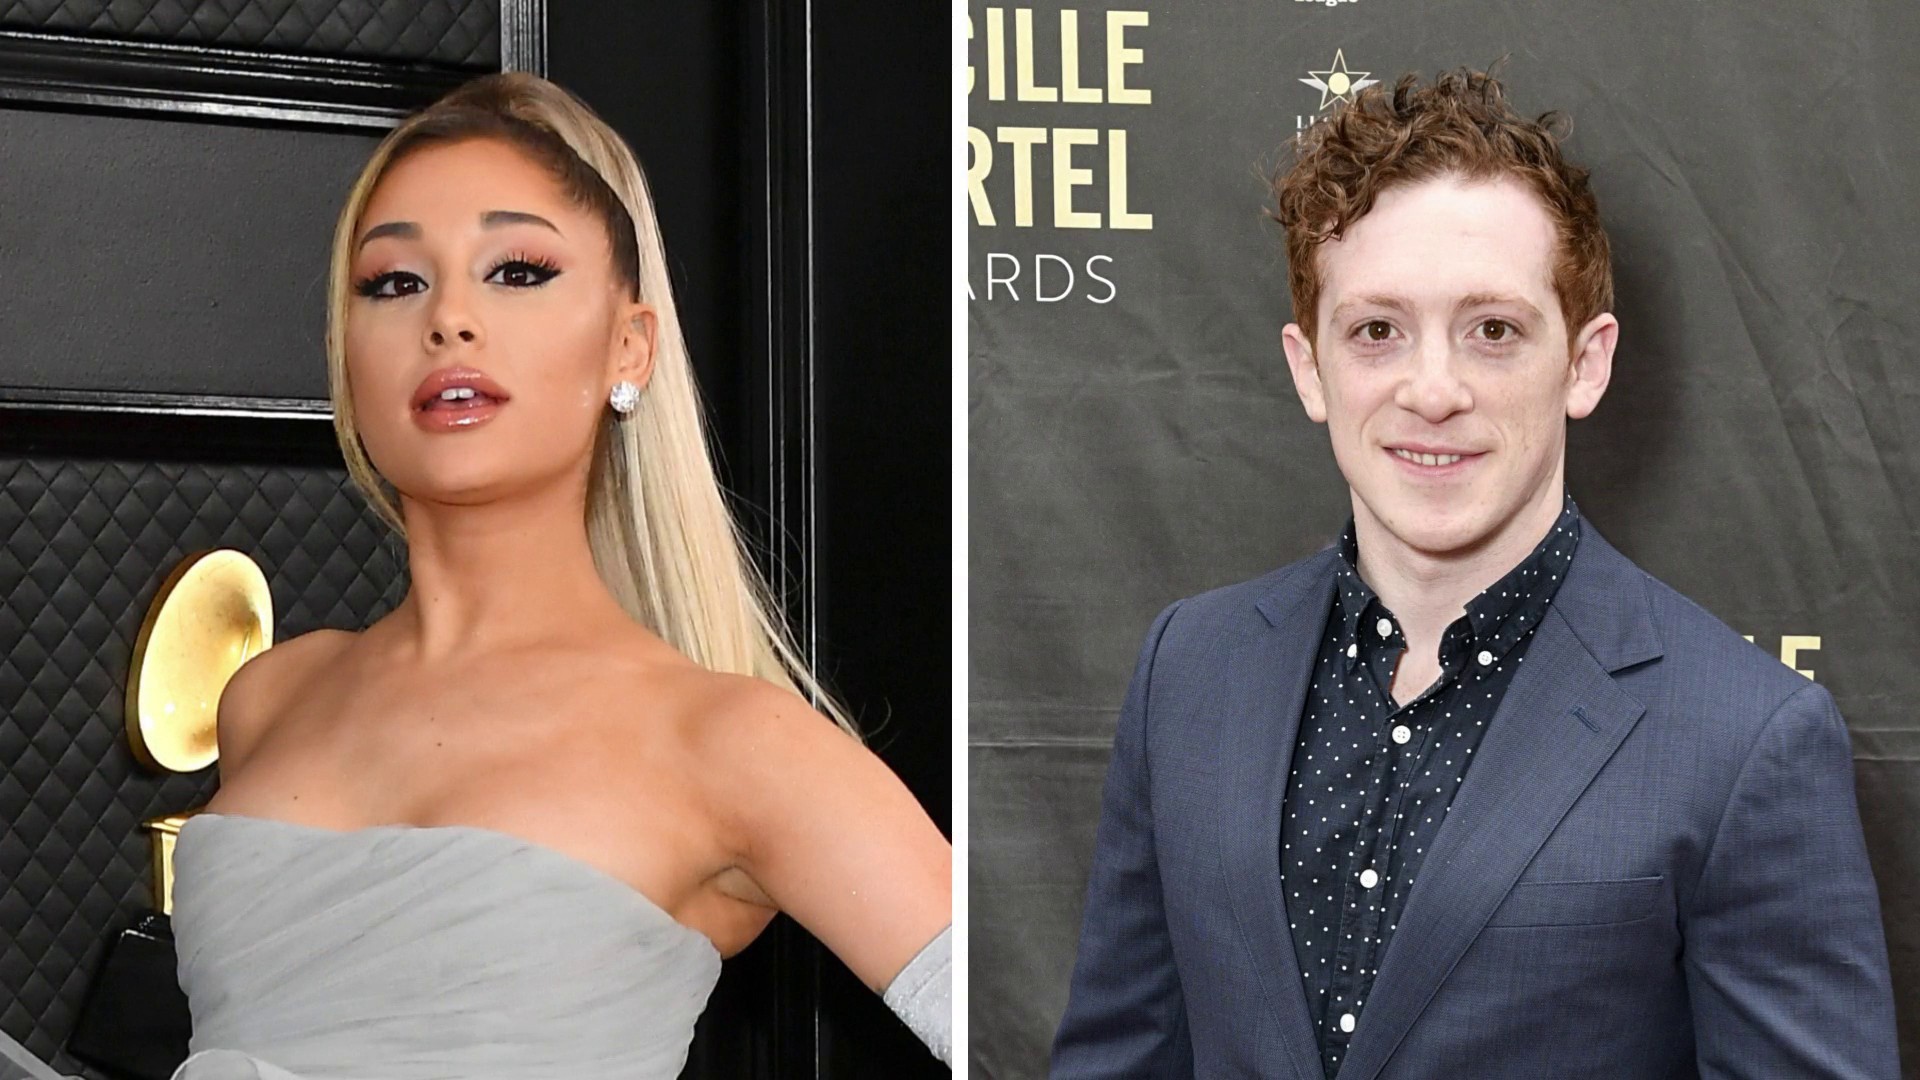 Is Ariana Grande dating ‘Wicked’ co-star Ethan Slater?